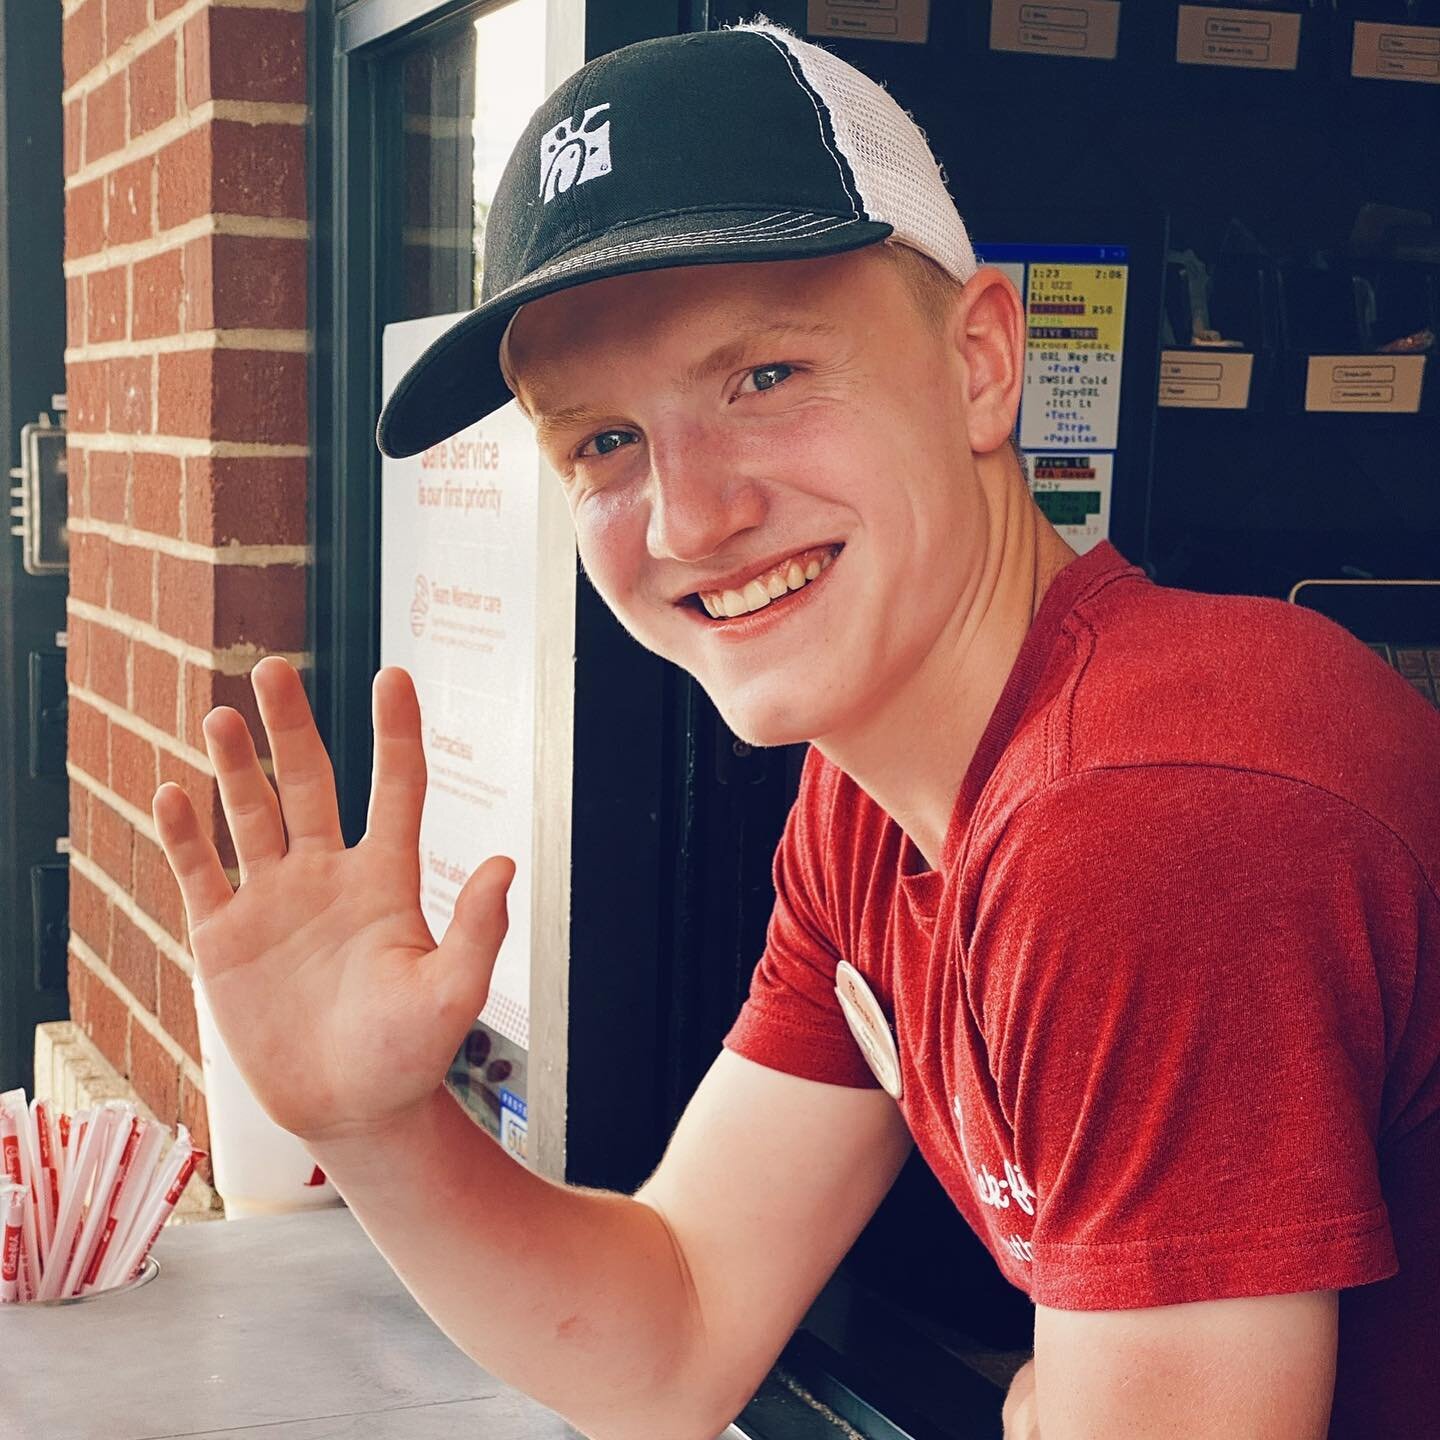 Oh, hey there👋 It would be a shame if someone&hellip;passed you some fresh nuggets and waffle fries to take home for the whole fam to enjoy 😉&hearts;️

#family #familydinner #familydinnerideas #familytime #share #sharethelove #chickfila #cfa